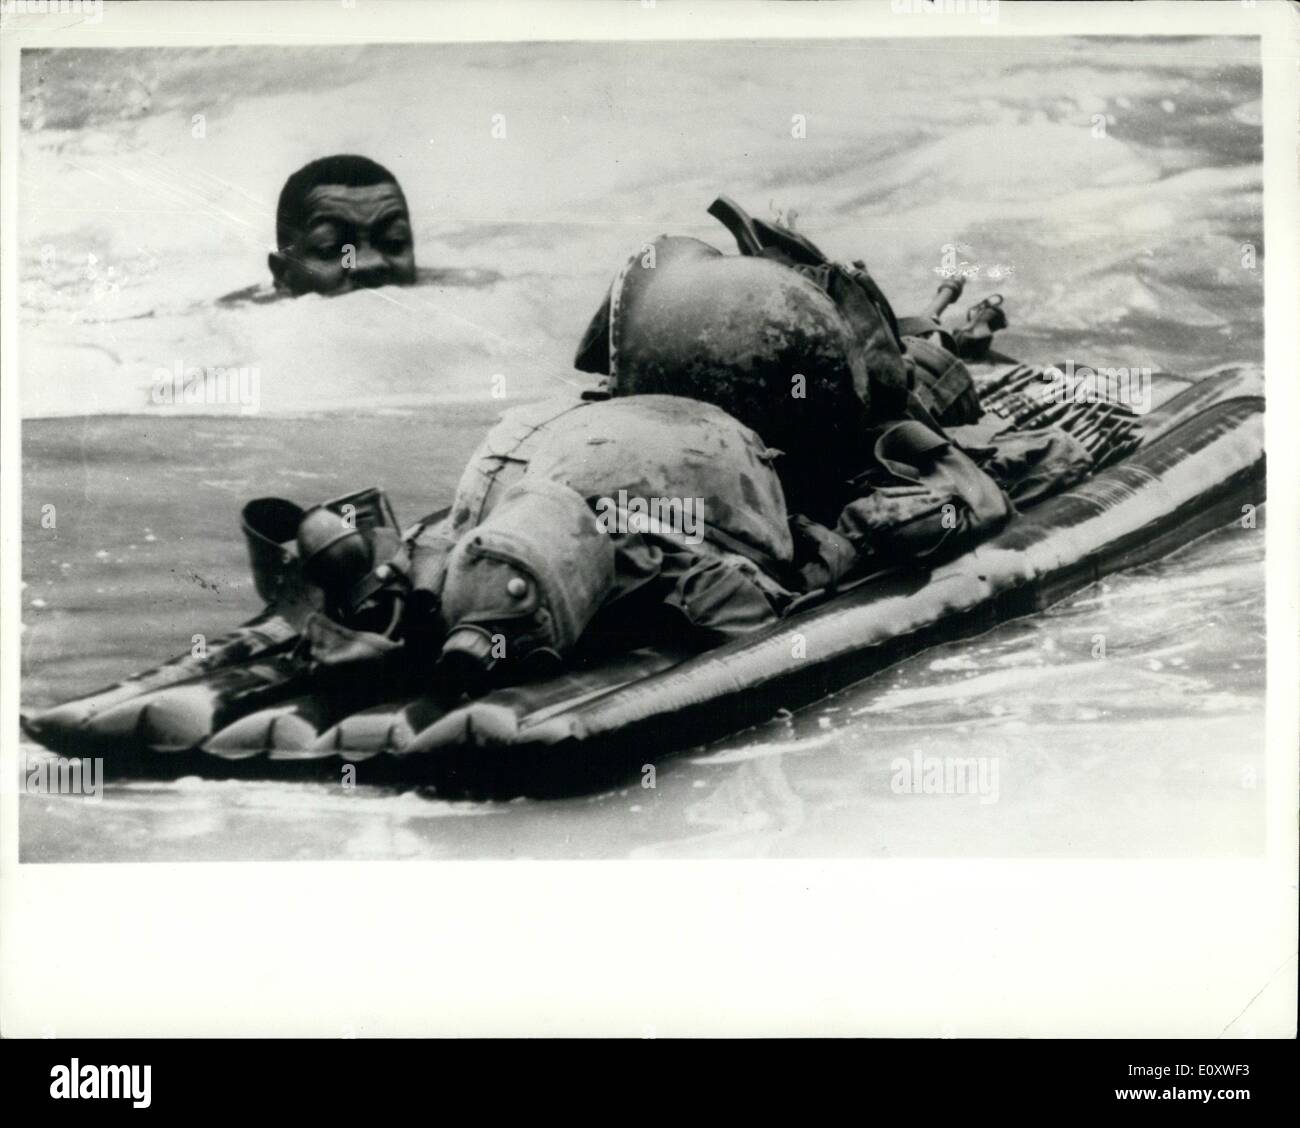 Oct. 10, 1967 - War in Vietnam.: One Way to Cross a Flooded Stream.: Pushing his combat gear-loaded air mattress, an infantryman swims across a monsoon-flooded stream during mission with the 1st. Battalion 5th. Infantry. The battalion is anticipating in the U.S. 25th, Division's Operation Kolekola, in Hau Nghia Provinces, Vietnam Stock Photo